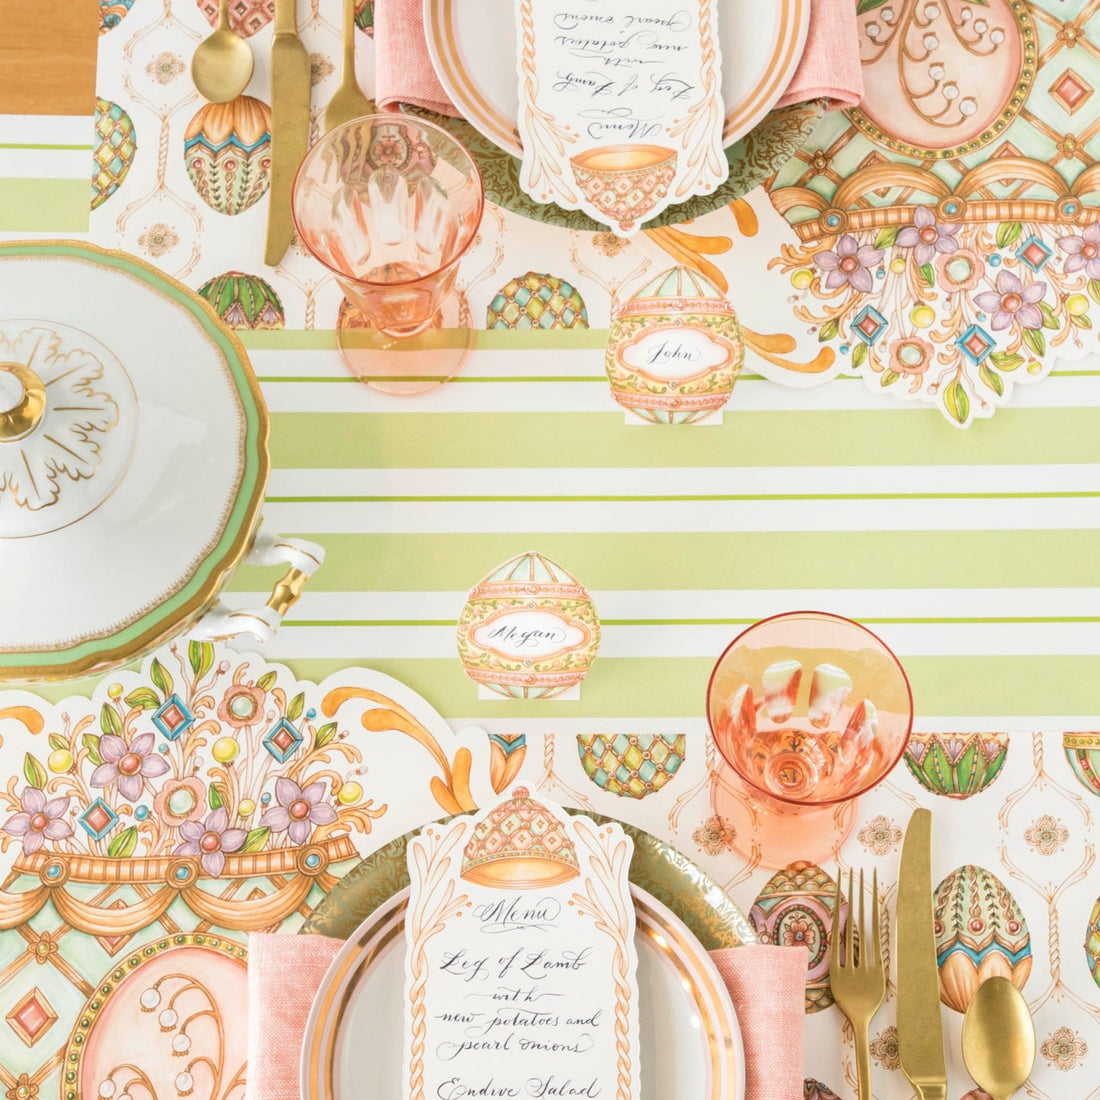 The Green Awning Stripe Runner under an elegant Easter-themed table setting, from above.